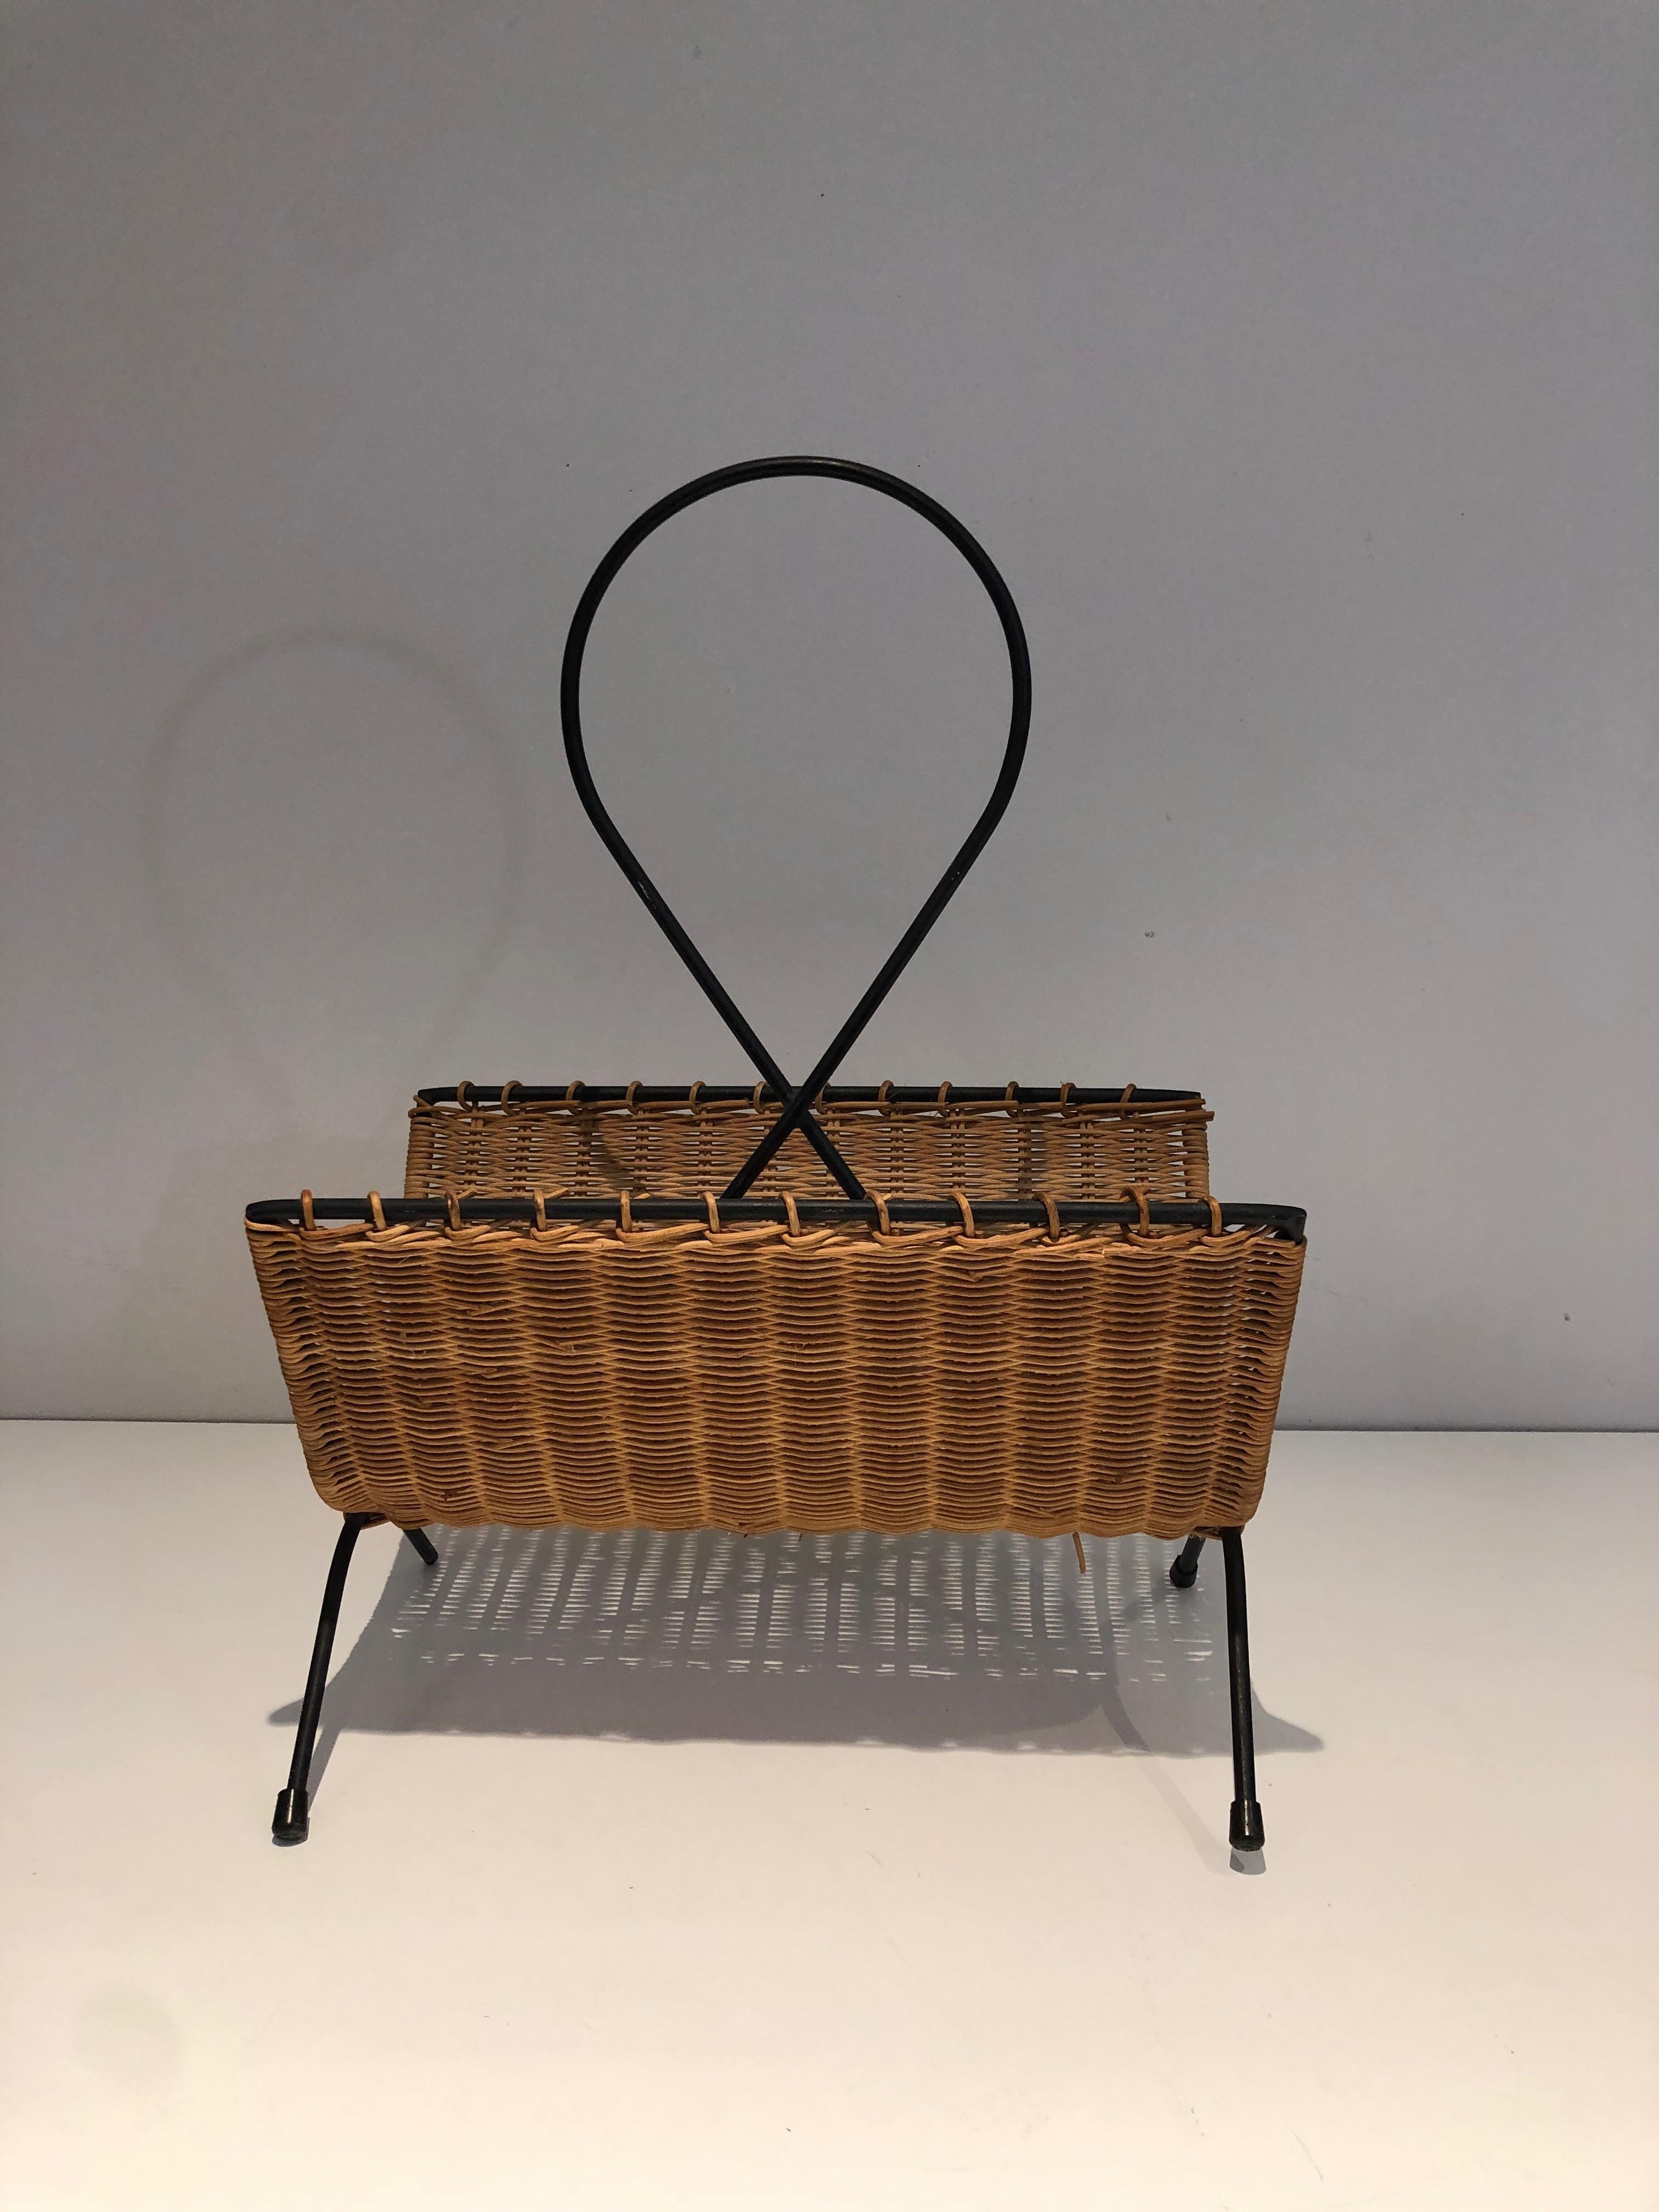 Black Lacquered Metal Magazine Rack, French Work, Circa 1950 For Sale 10